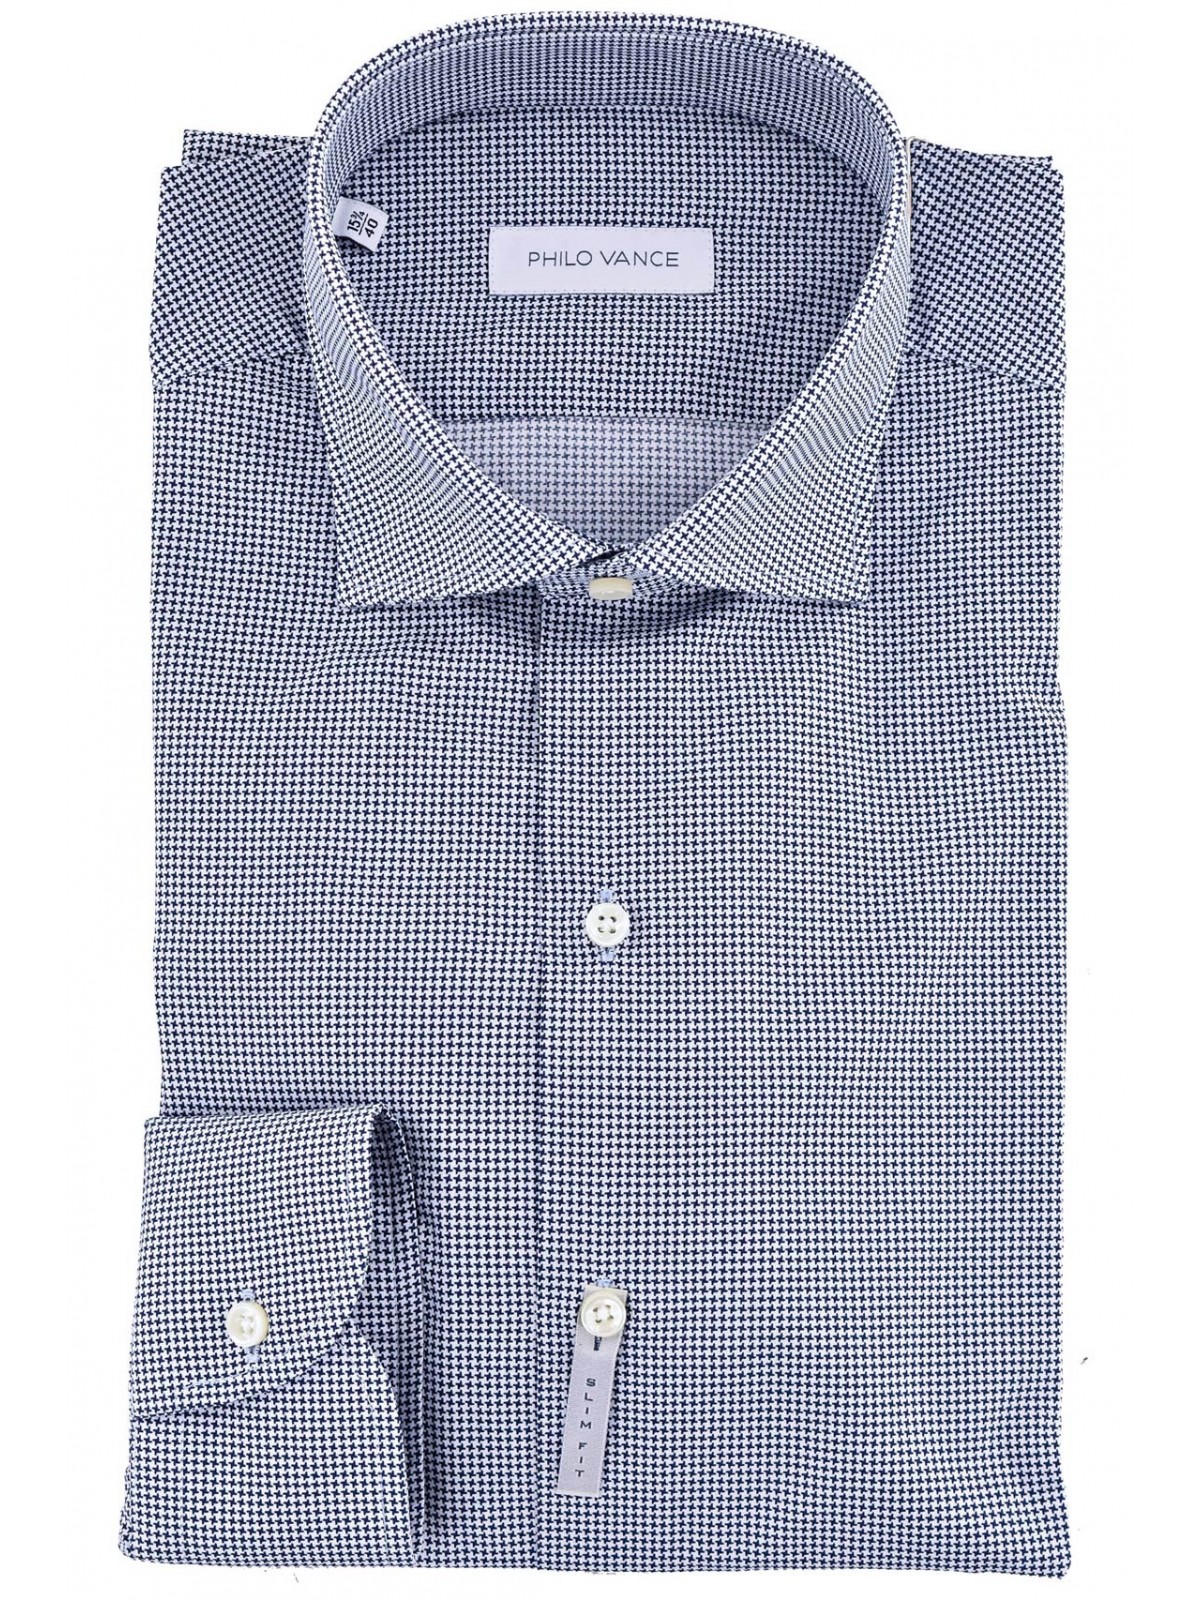 Slimfit Man Shirt with French Collar Pied de Poule White Blue - Cefalù